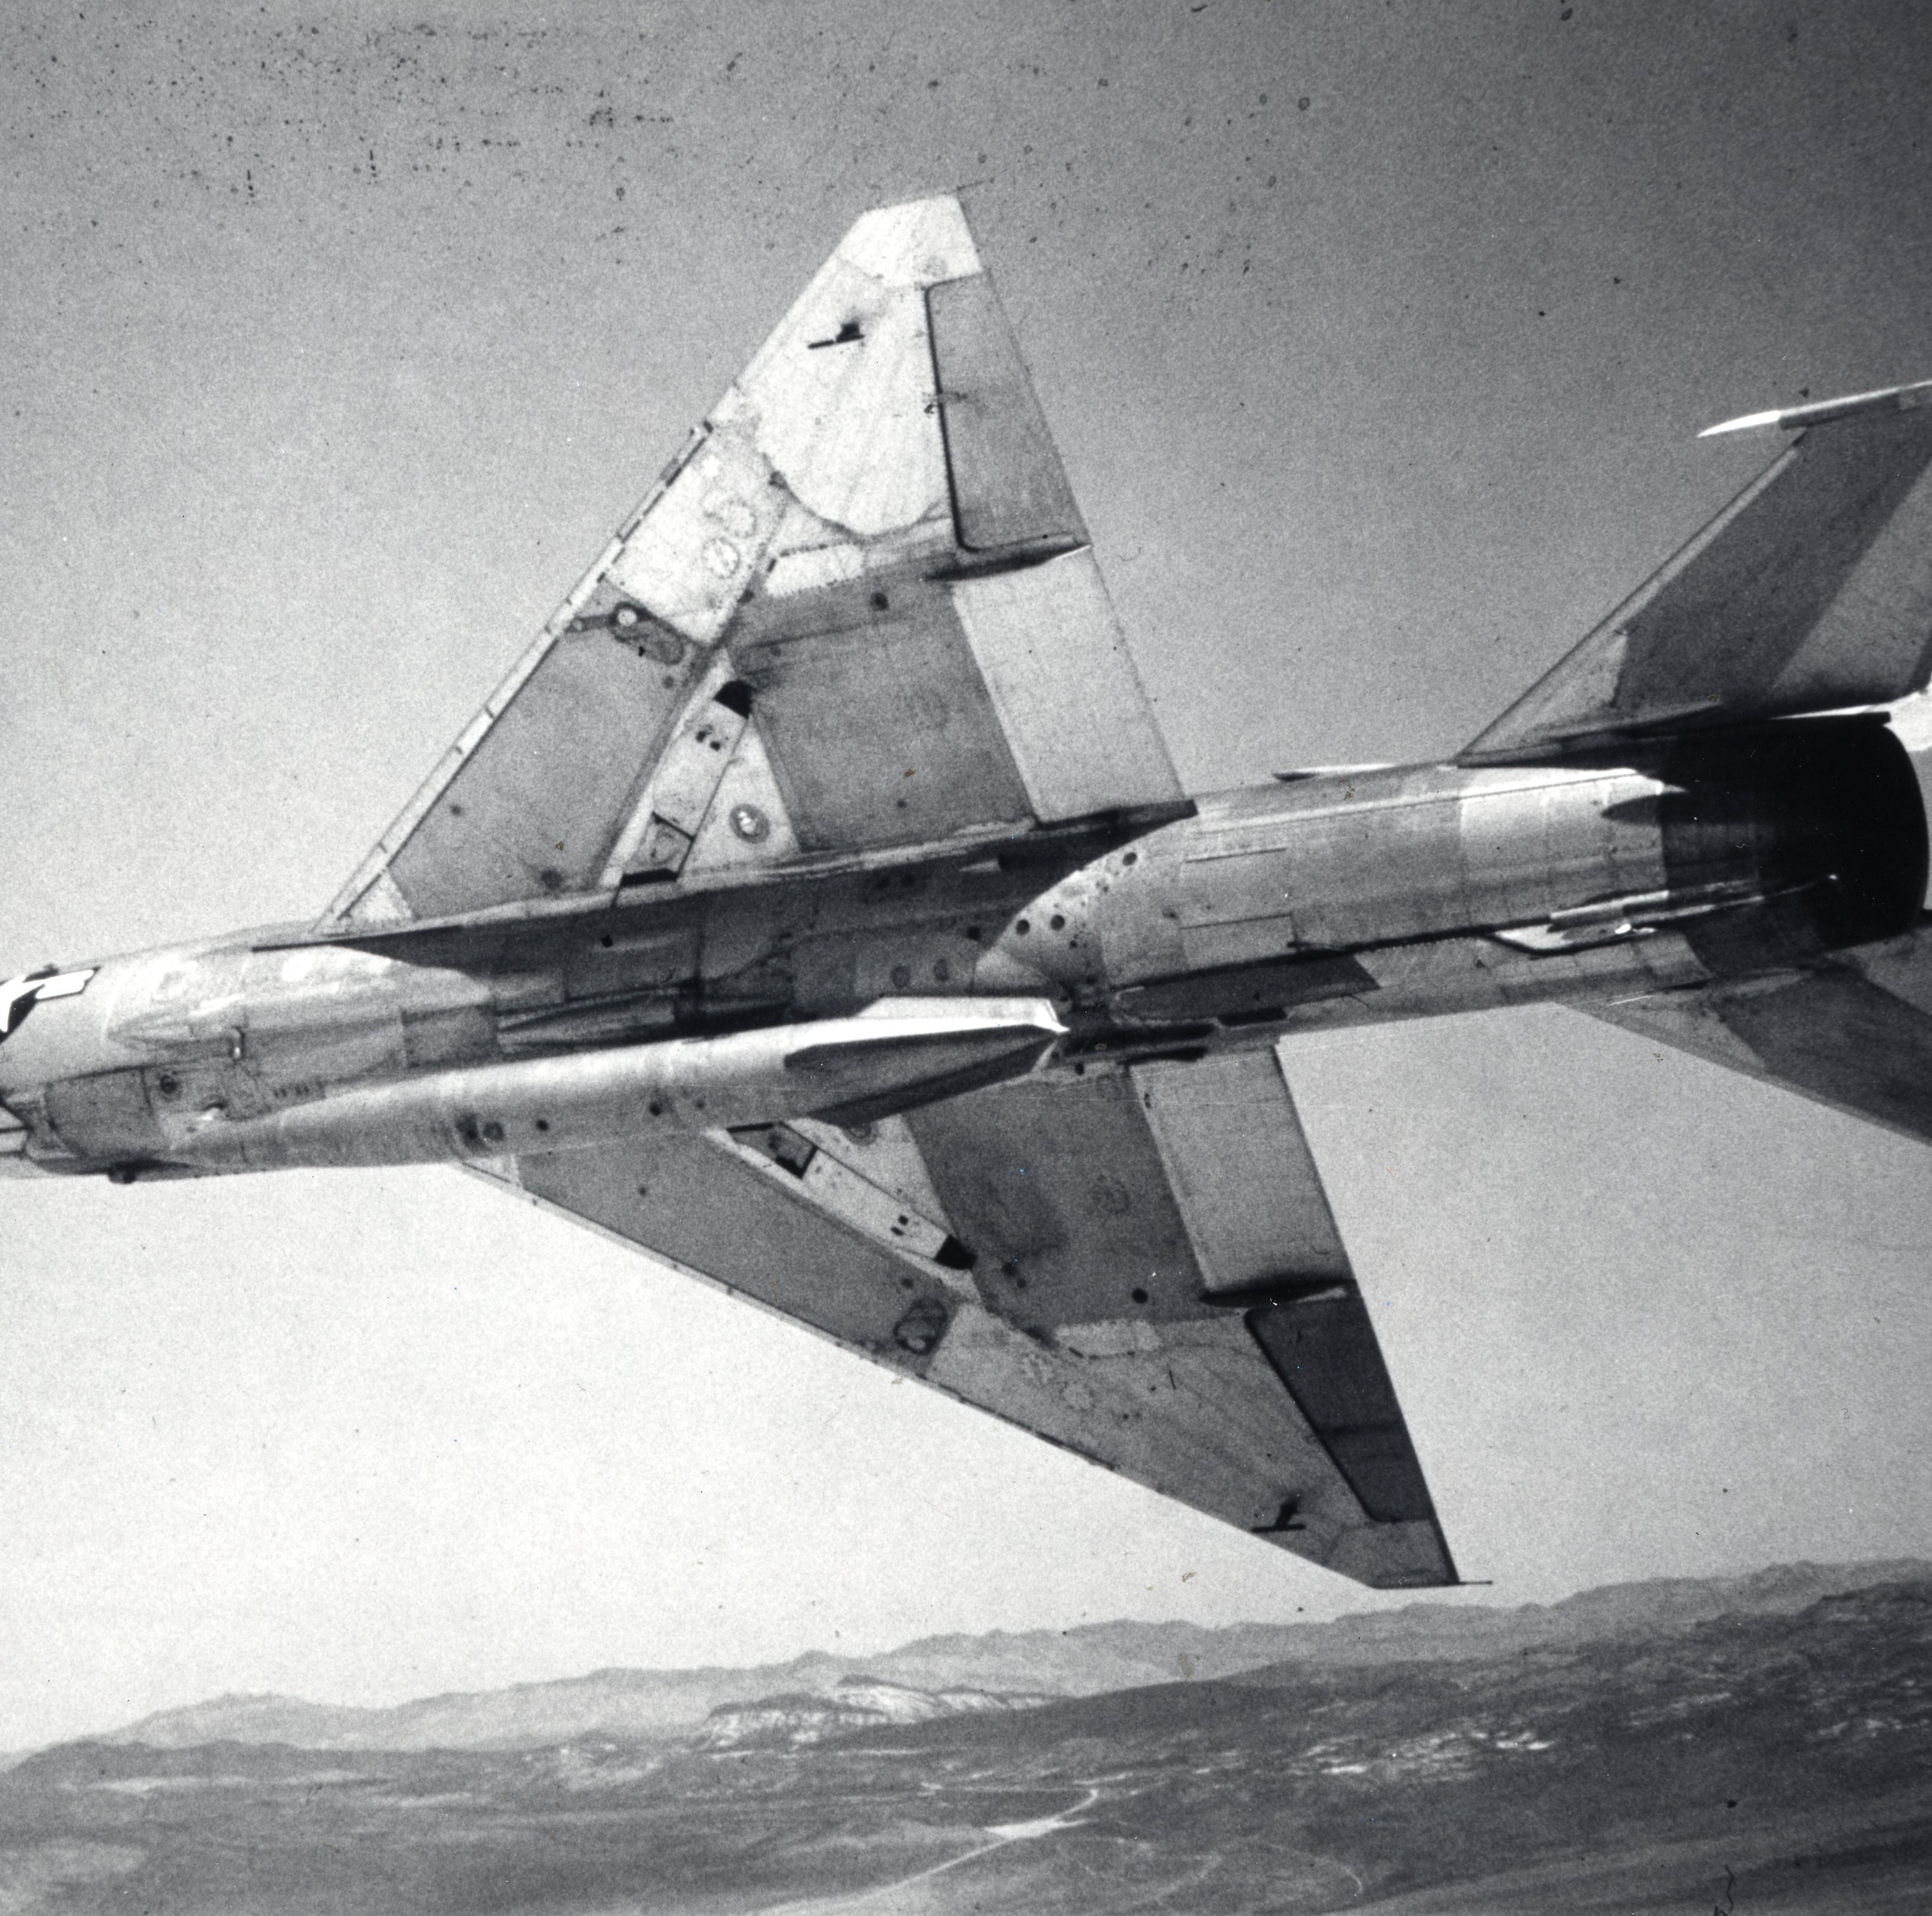 Air Force Pilot Reveals What It Was Like to Fly the Secret Soviet MiG-21